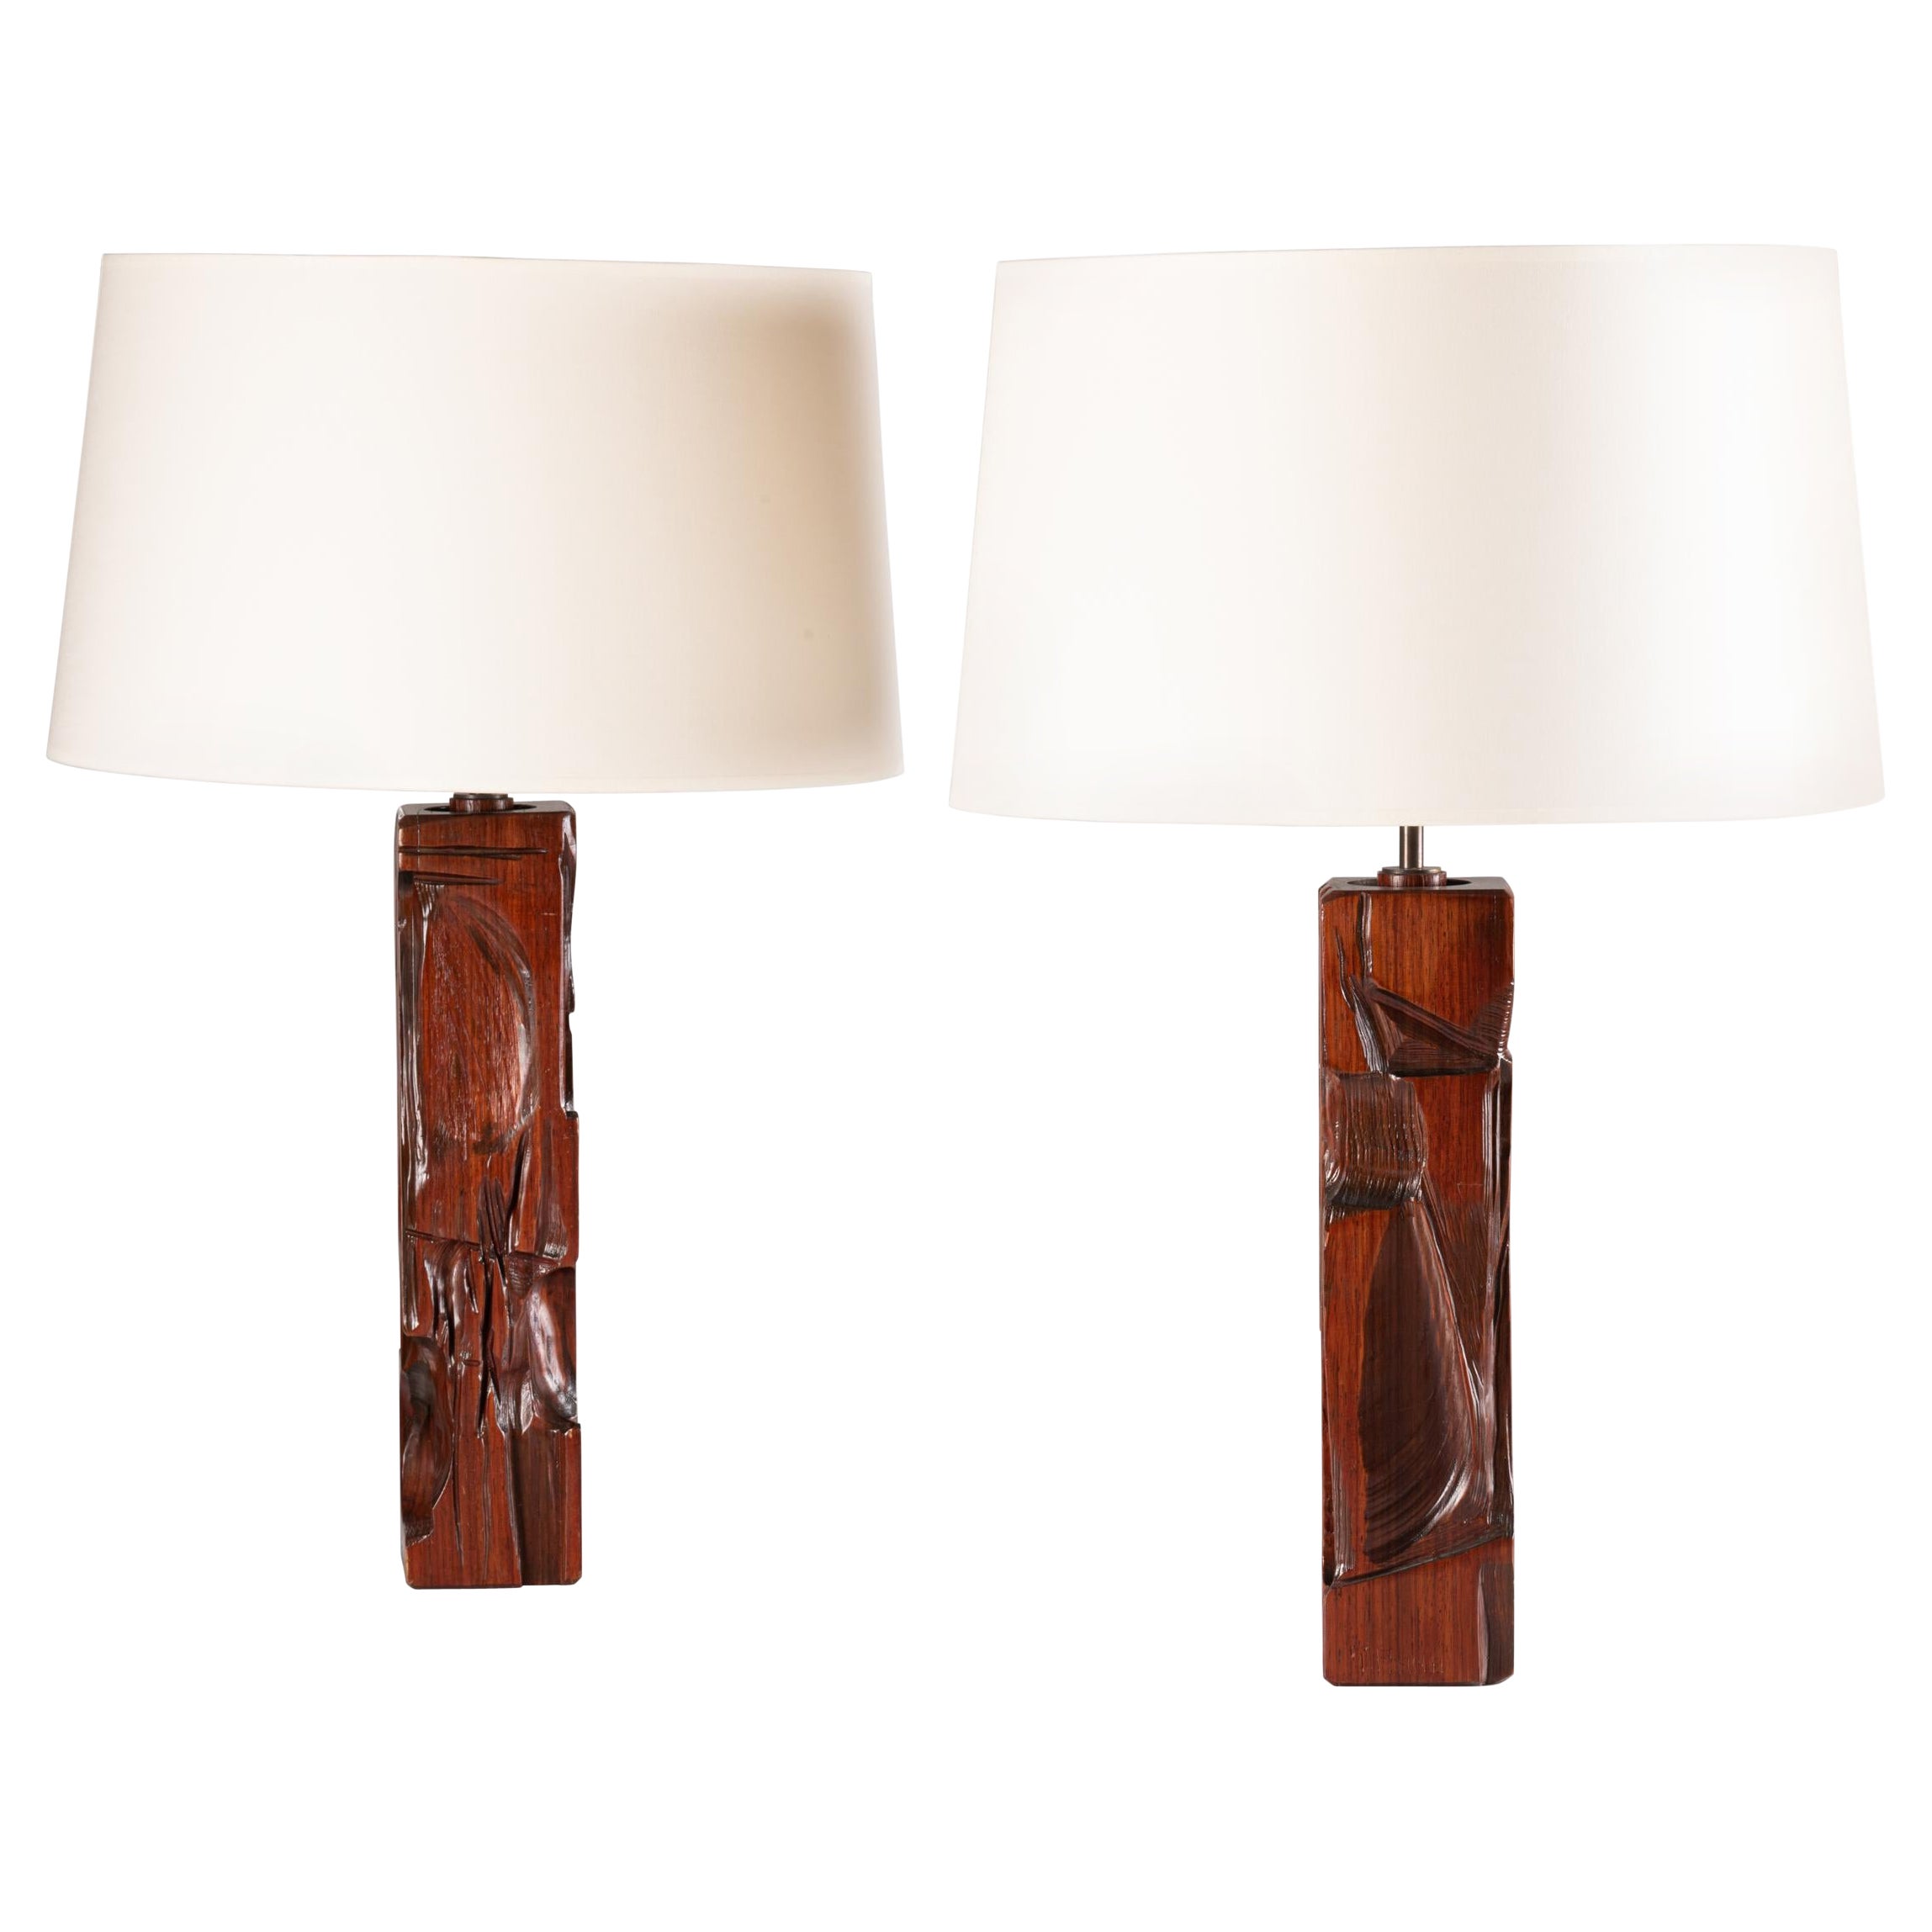 Pair of Carved Wood Table Lamps by Gianni Pinna For Sale